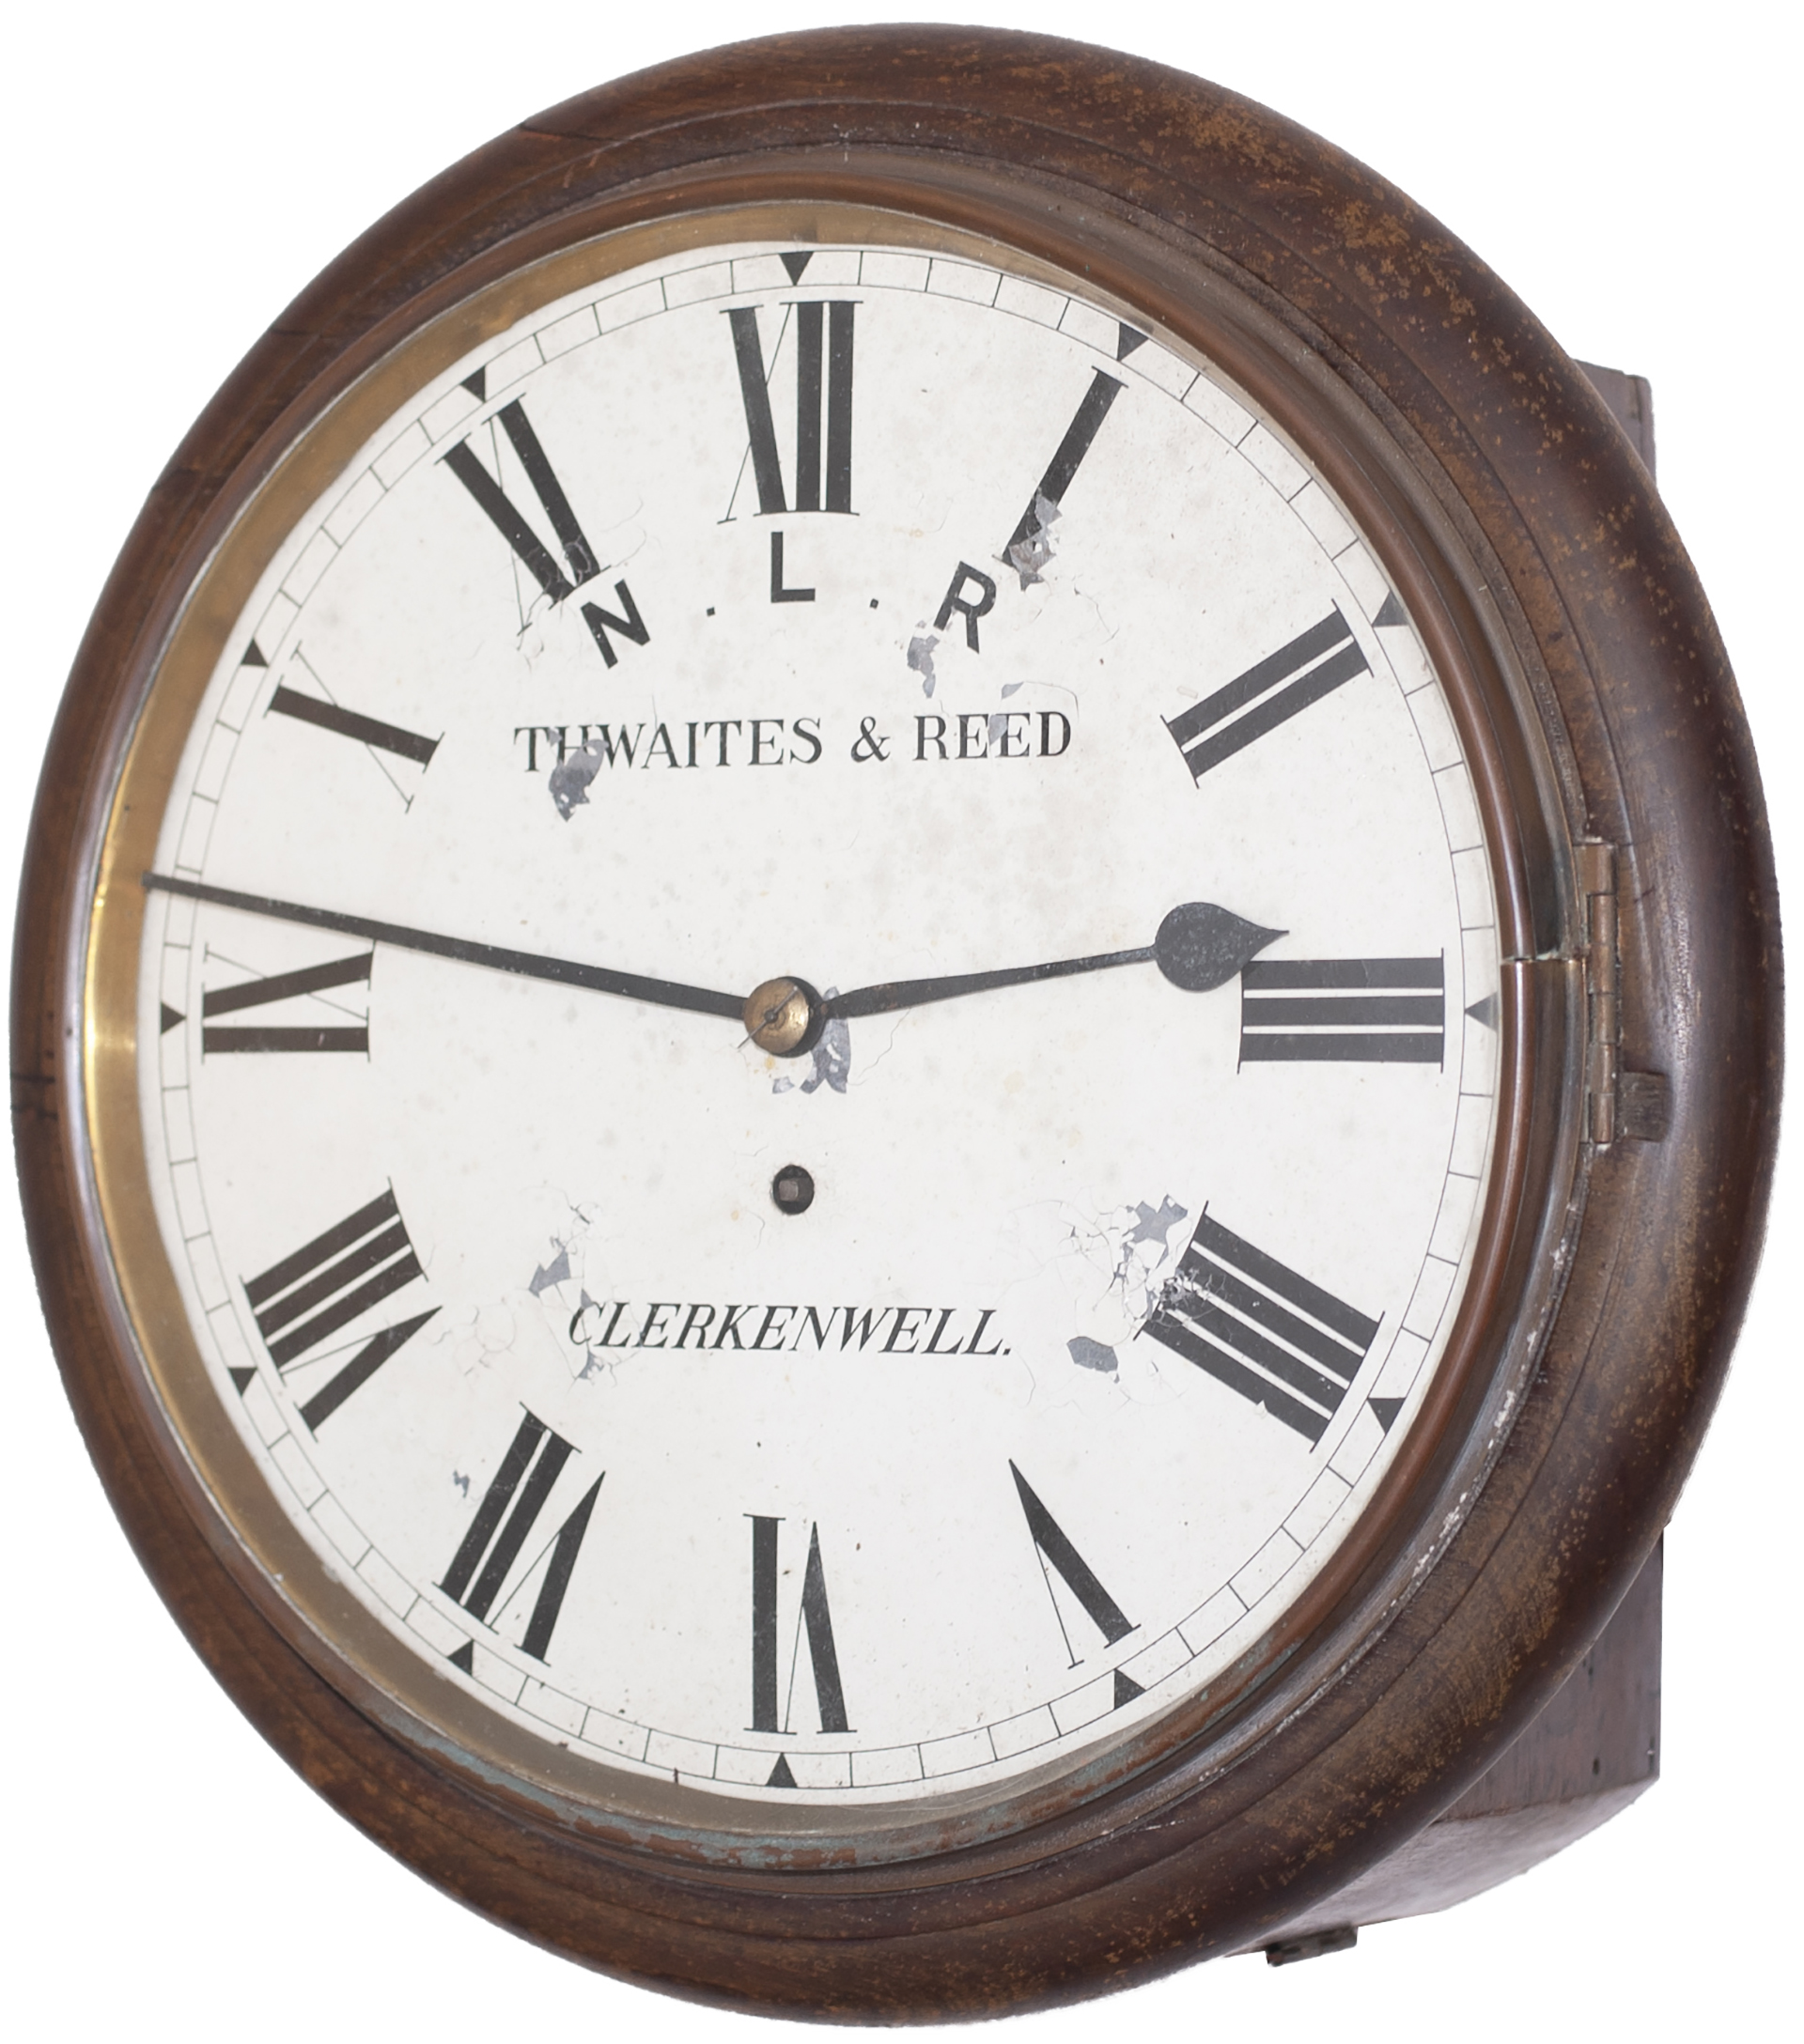 North London Railway 12in dial mahogany cased railway clock with supplied by Thwaites & Reed of